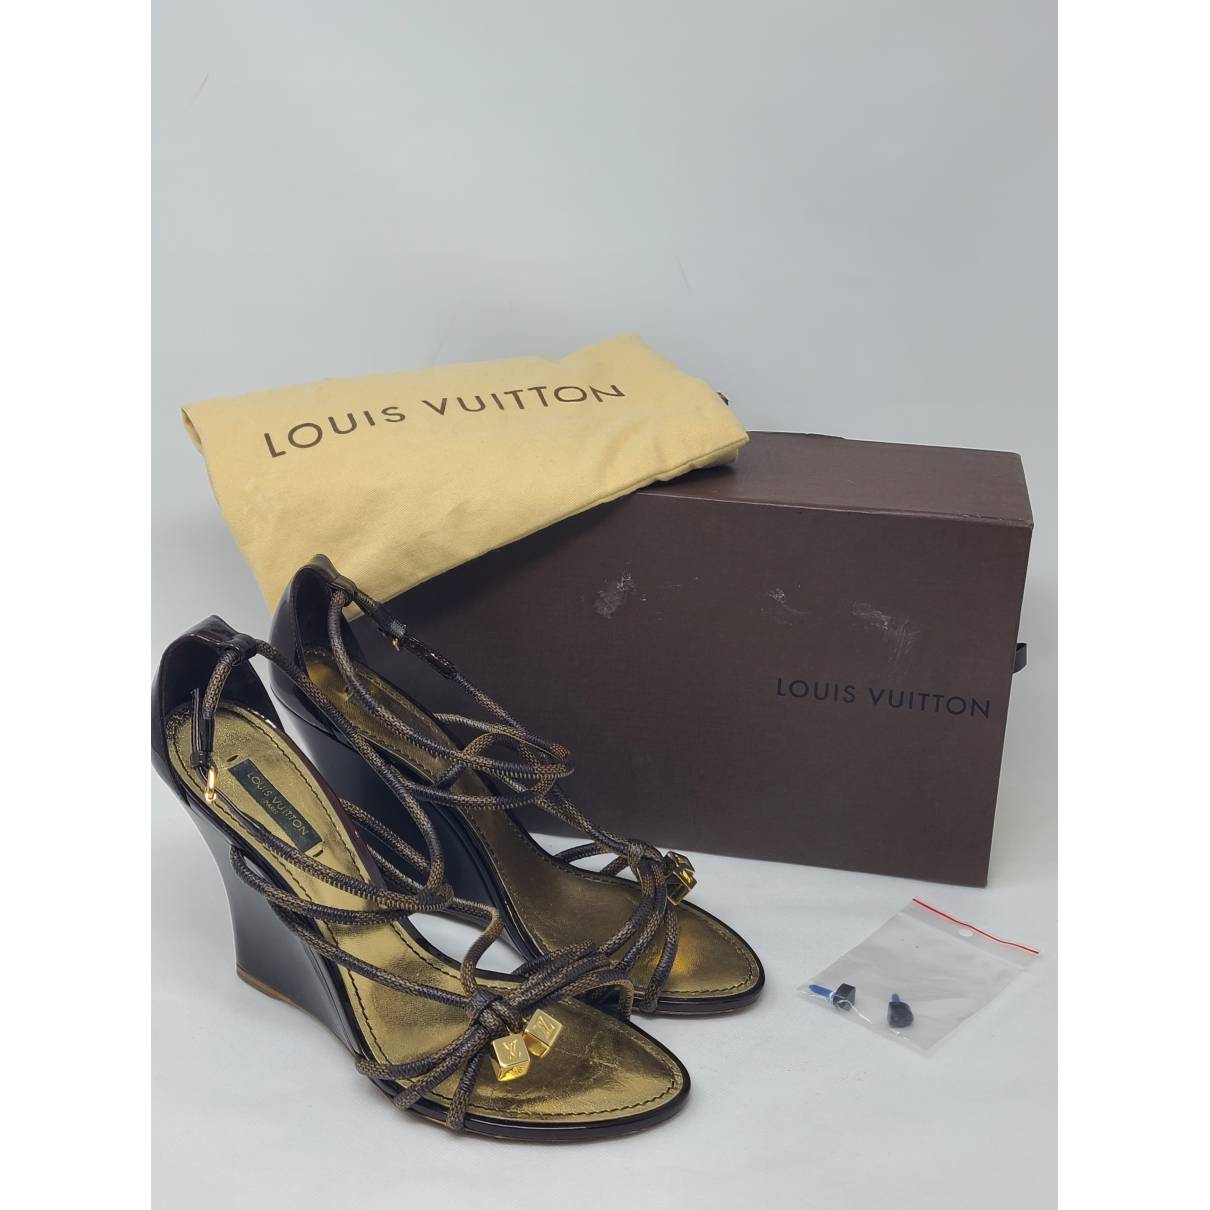 Louis Vuitton - Authenticated Bom Dia Sandal - Leather Brown Abstract for Women, Very Good Condition